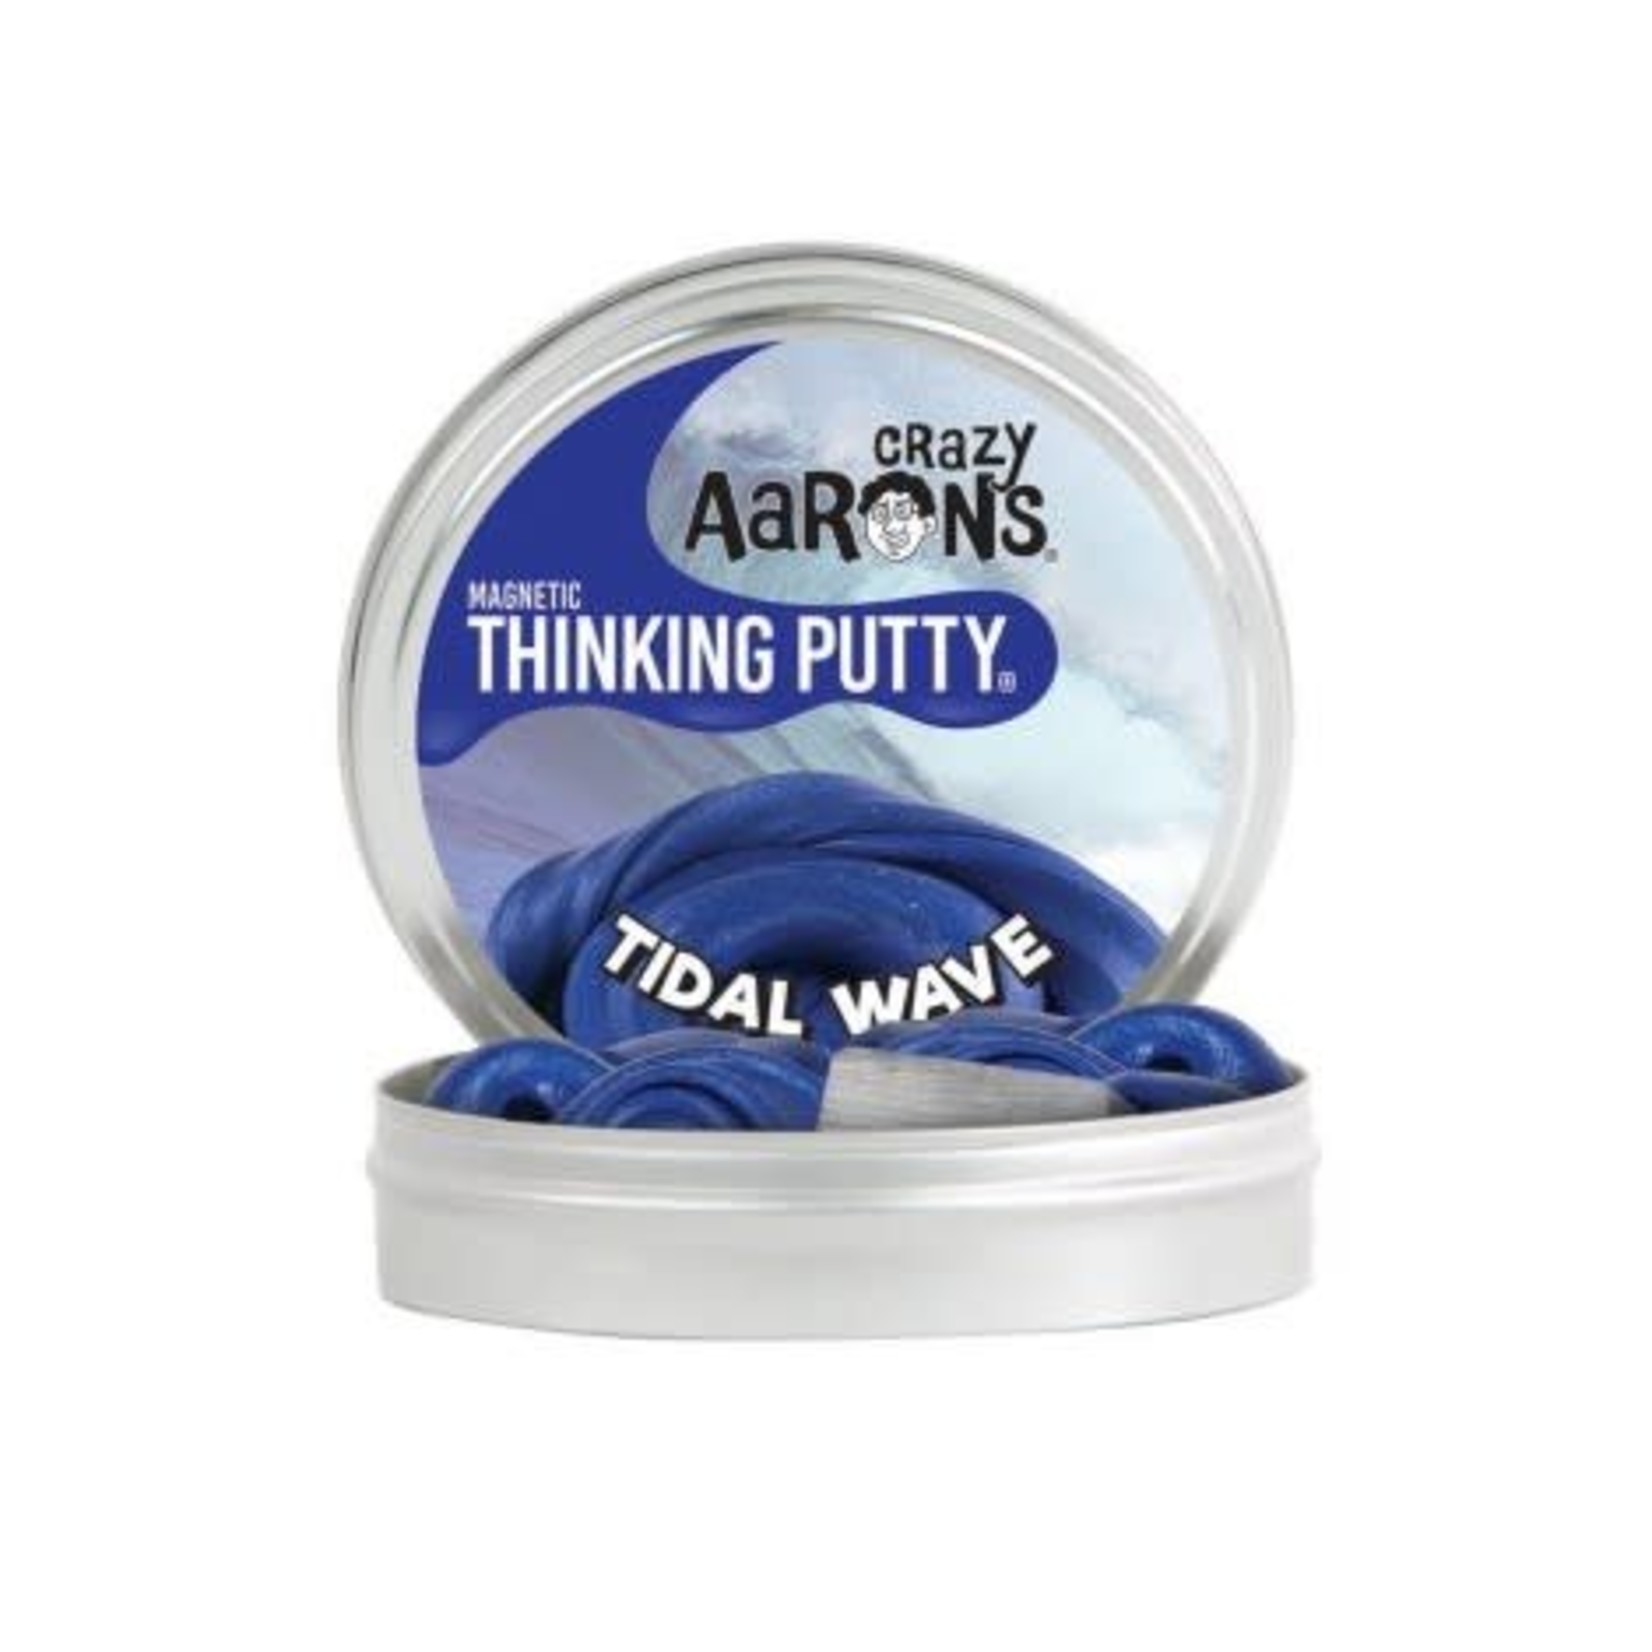 Crazy Aaron's Crazy Aaron's Tidal Wave Thinking Putty